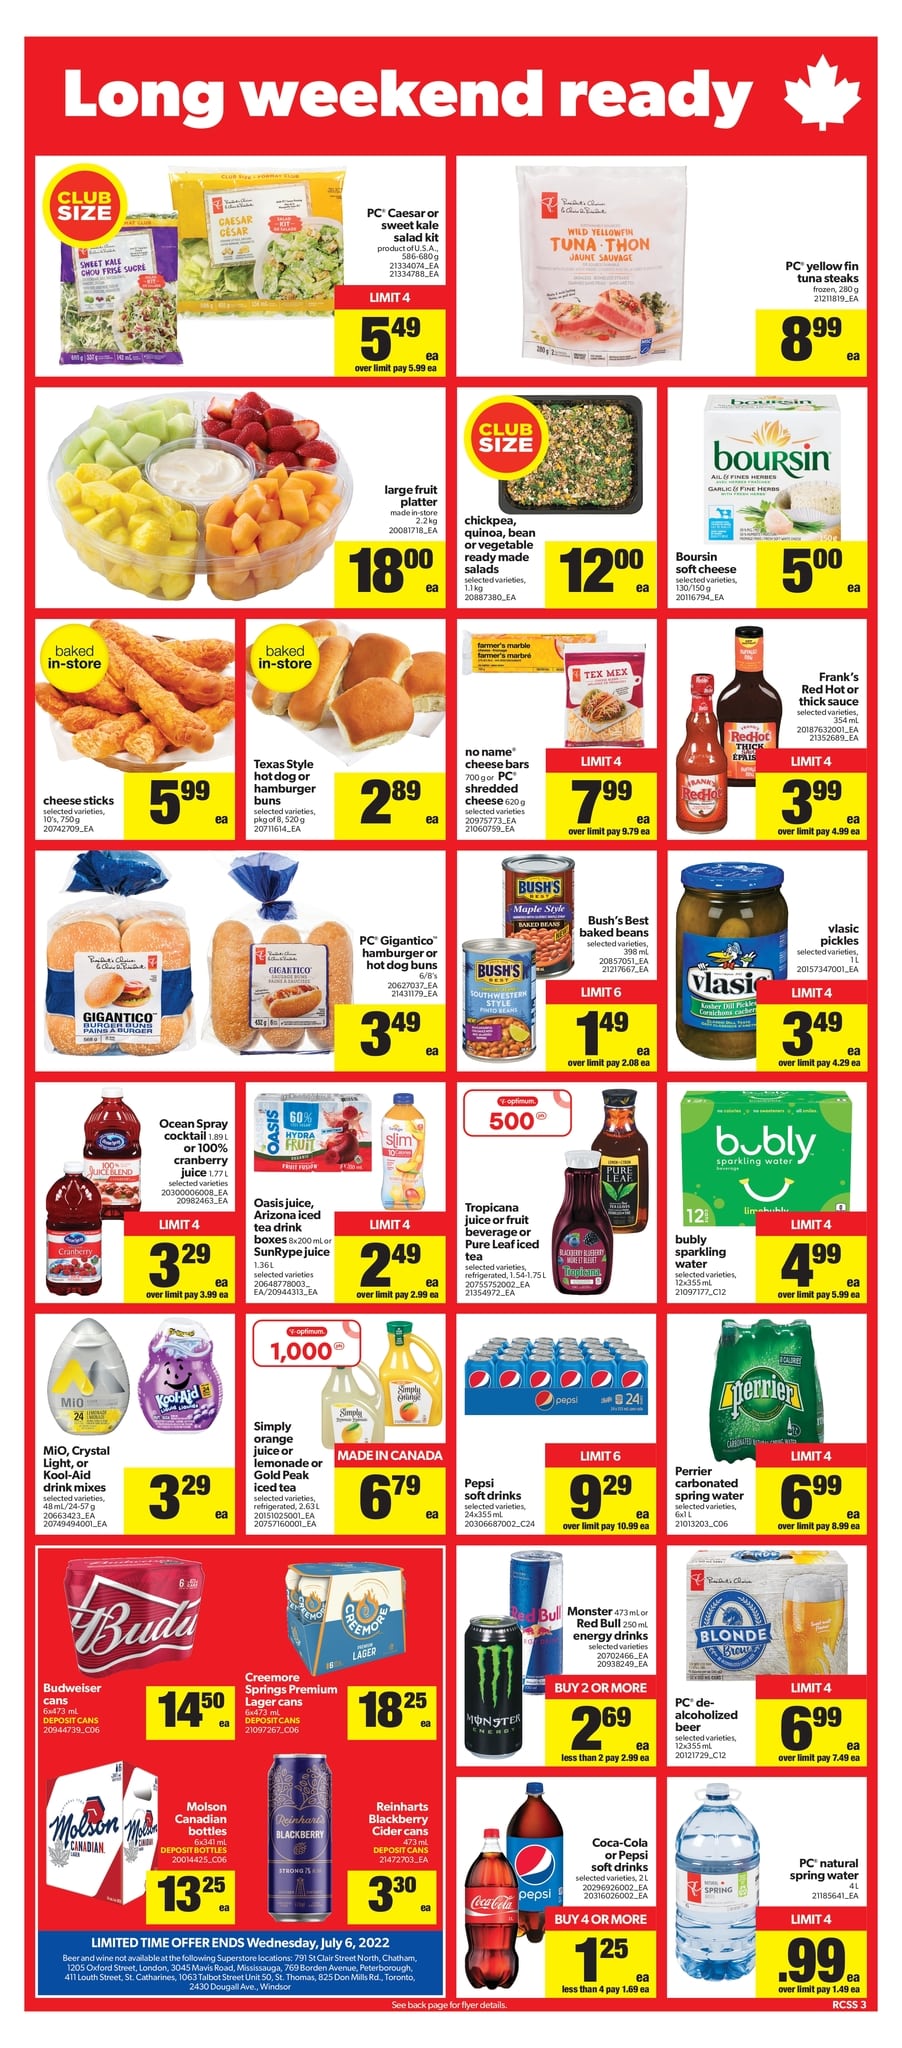 Real Canadian Superstore Ontario - Weekly Flyer Specials - Page 4